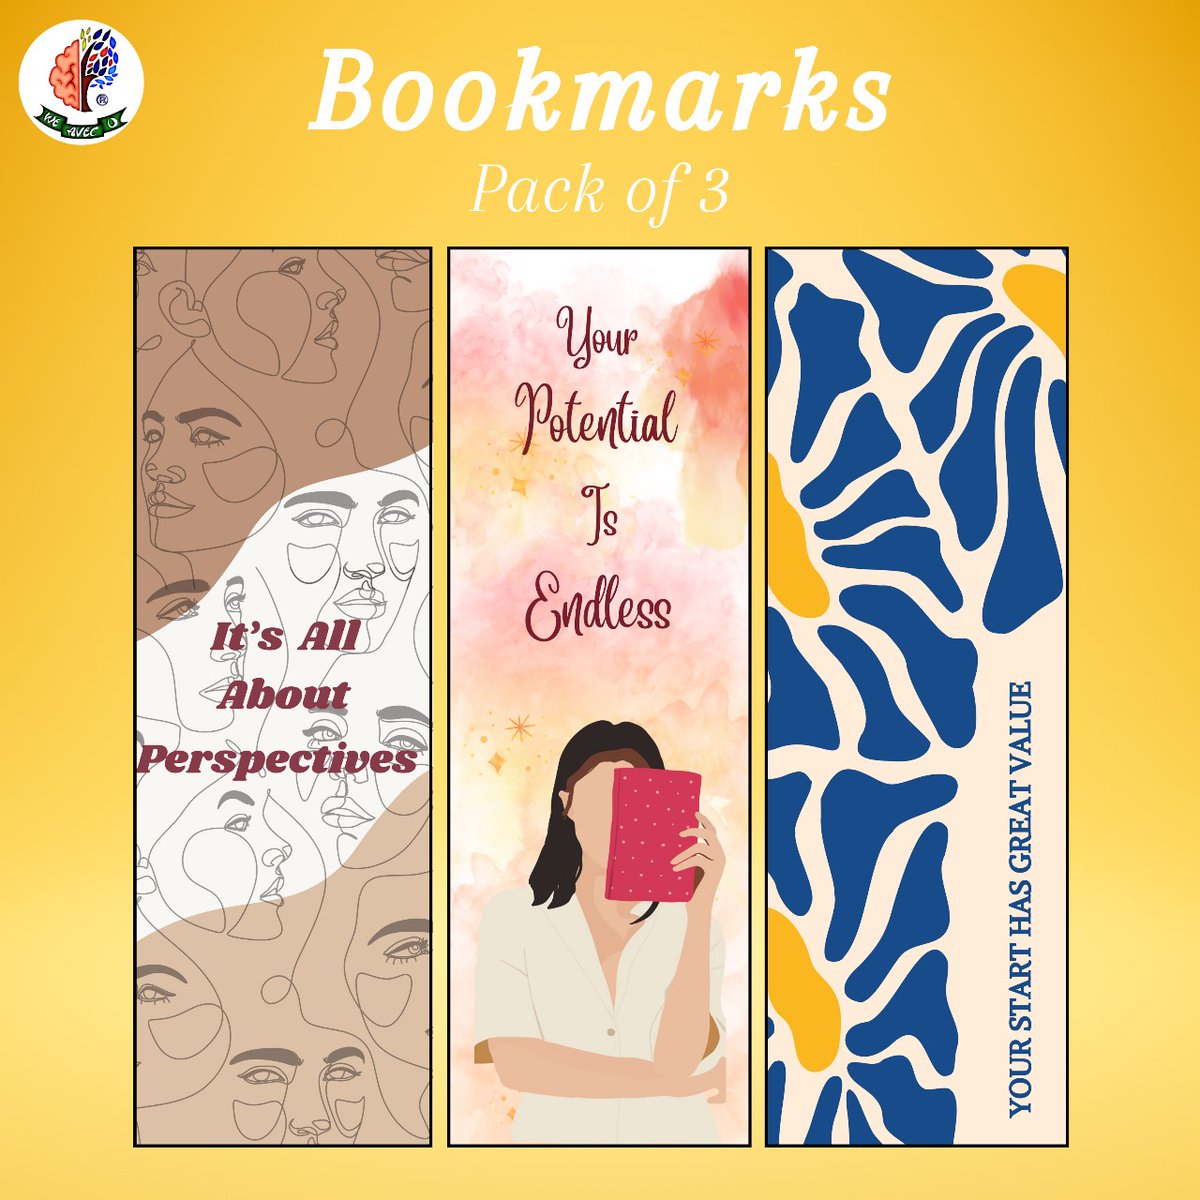 Buckle up everyone! 
Our latest collection of bookmarks is now available to take your reading aesthetic to new heights 📚🔖✨

#bookstagram #booklover #weavecu #psychology #bookmark #aesthetic #amityuniversity #booknerd #shoppingonline #avechope #merchandise #onlineshoppingindia